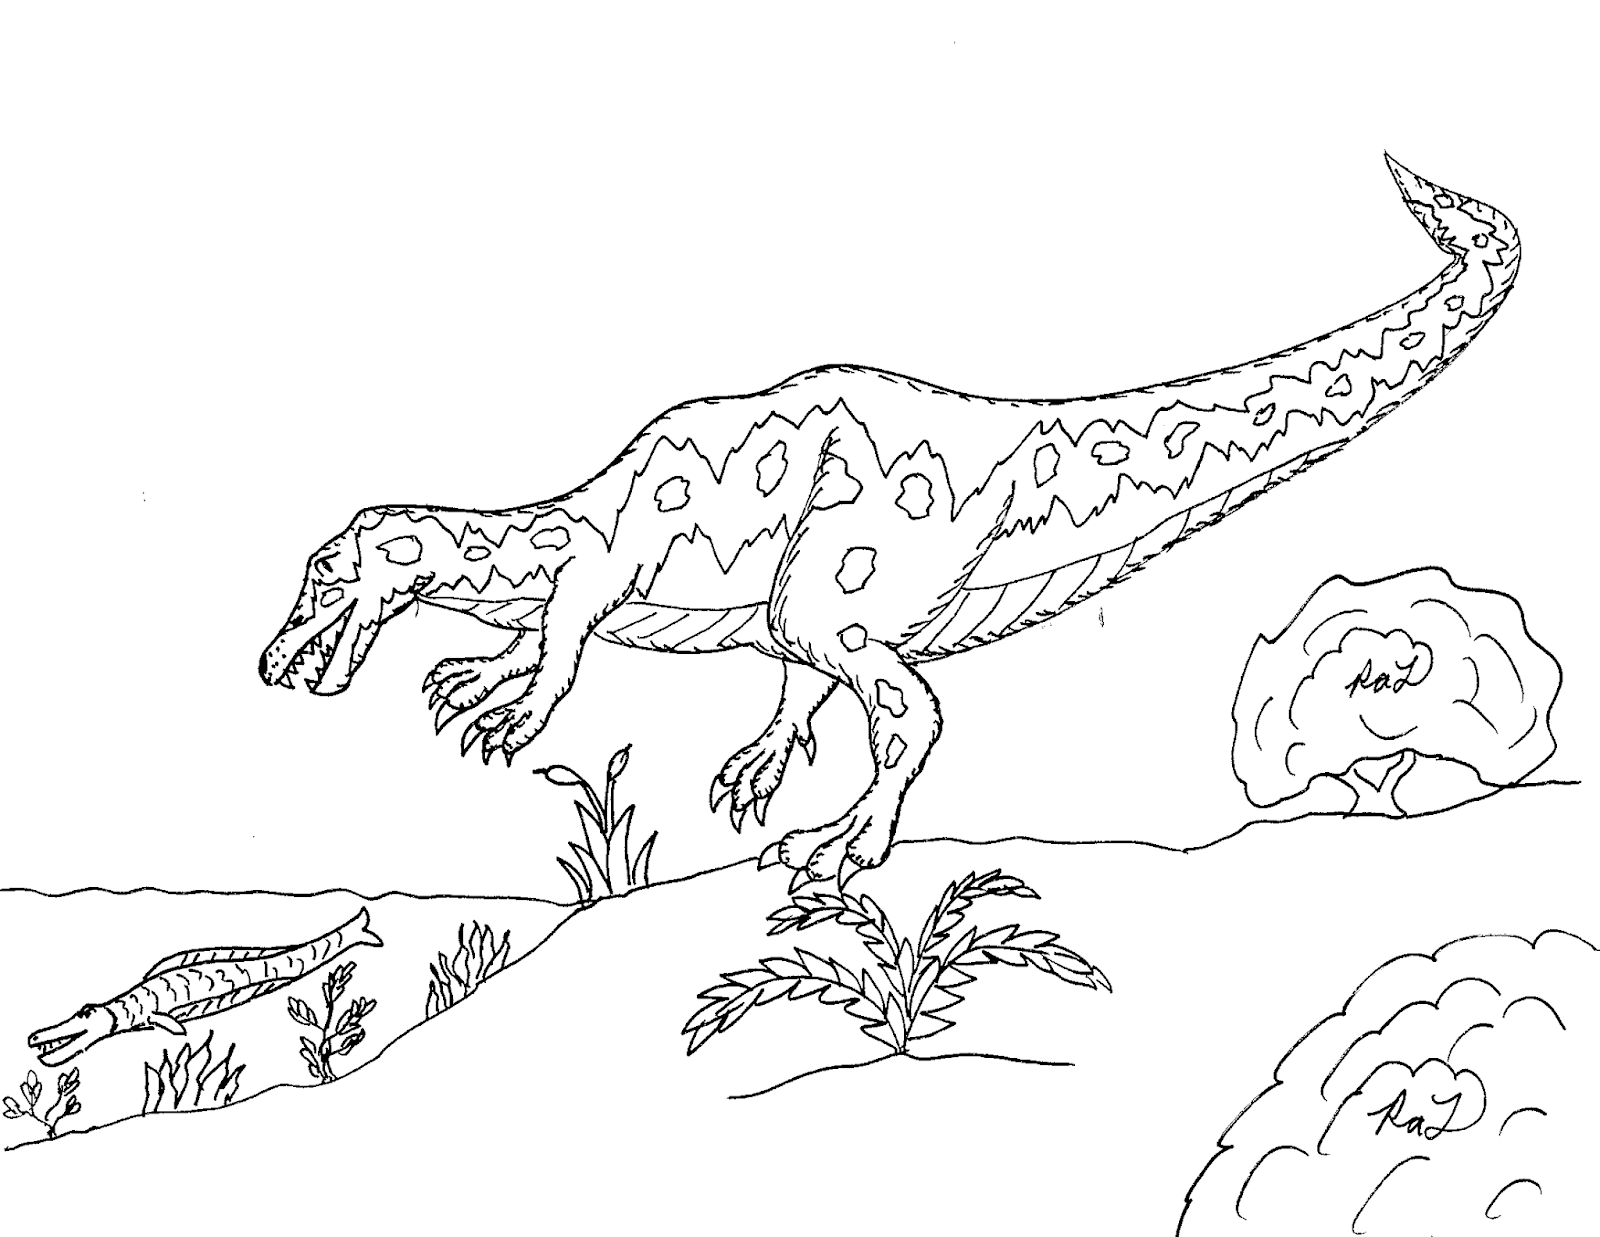 Robin's Great Coloring Pages: Suchomimus & Spinosaurus & Baryonyx